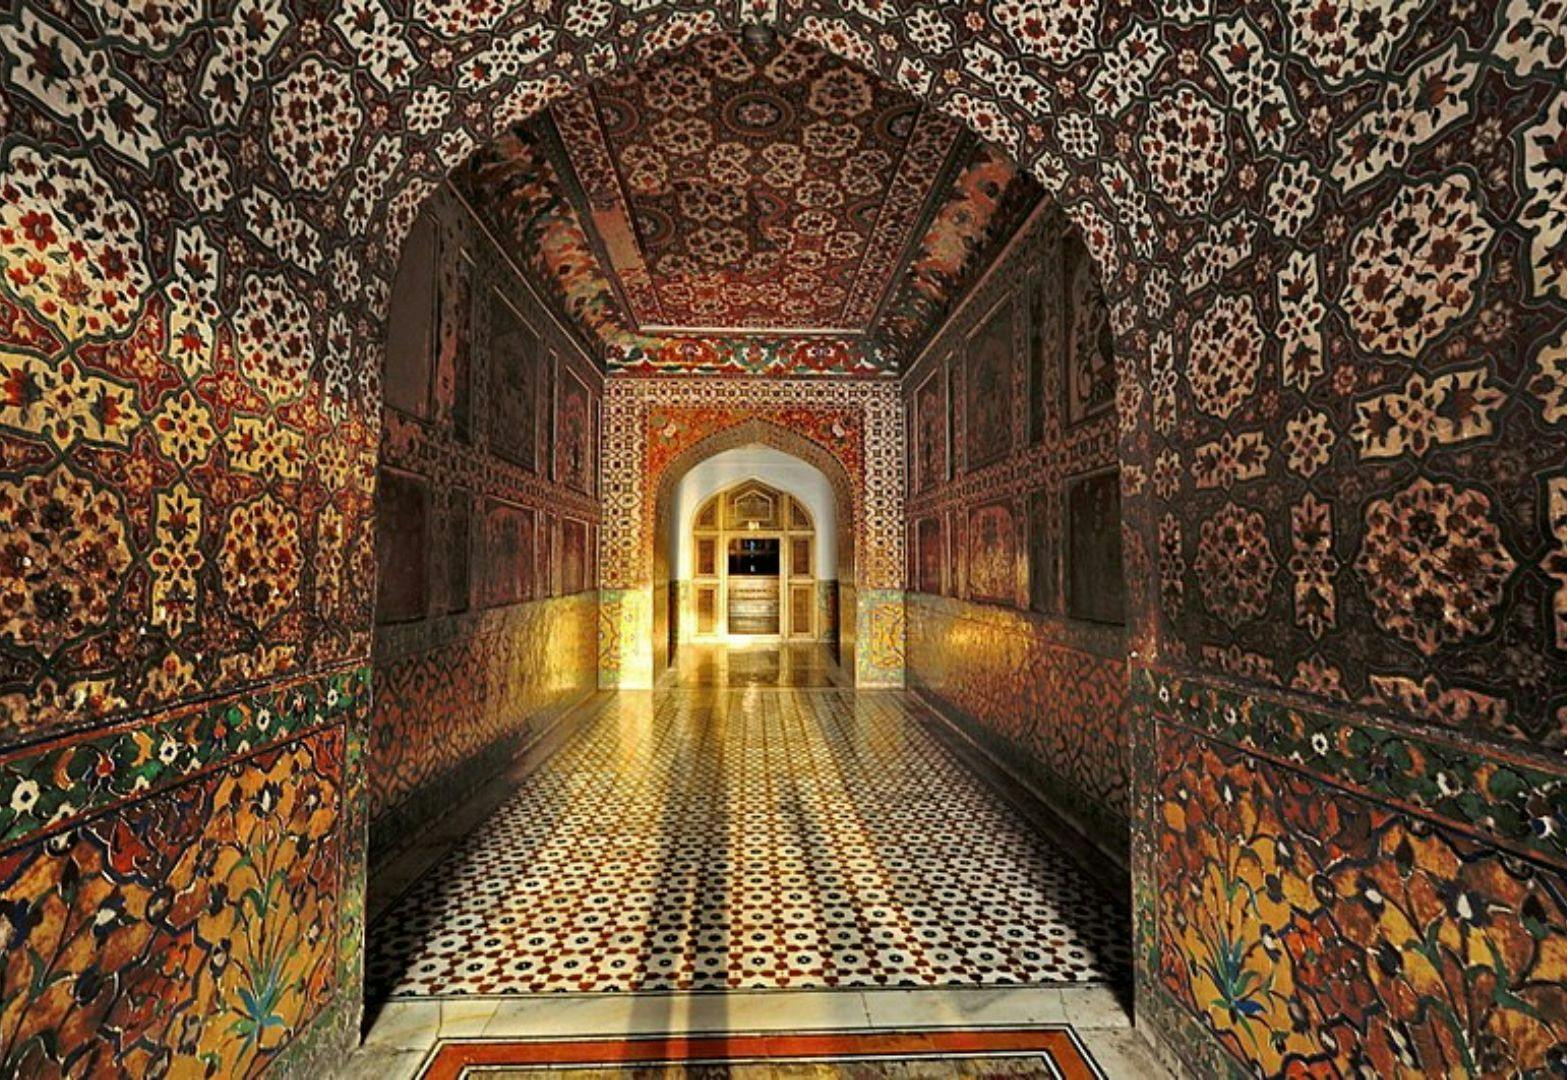 The interiors of the tomb are decorated with exquisite marble inlay work known as ‘Parchin Kari’ | Wikimedia Commons